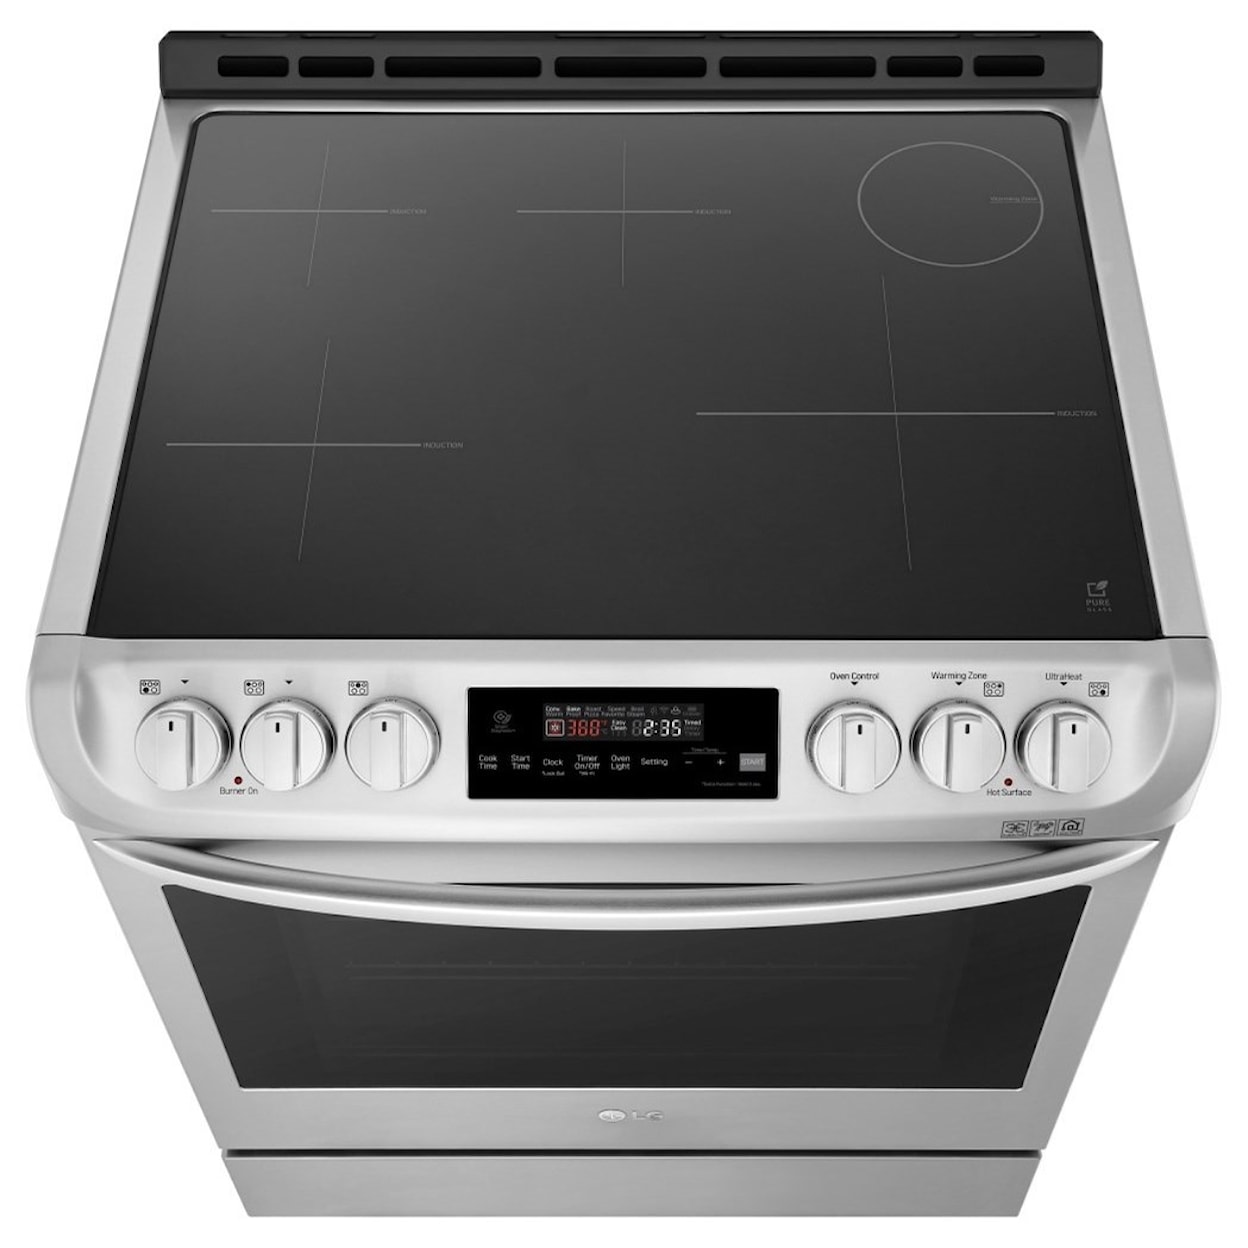 LG Appliances Electric Ranges 6.3 cu. ft. Wi-Fi Enabled Induction Slide-in